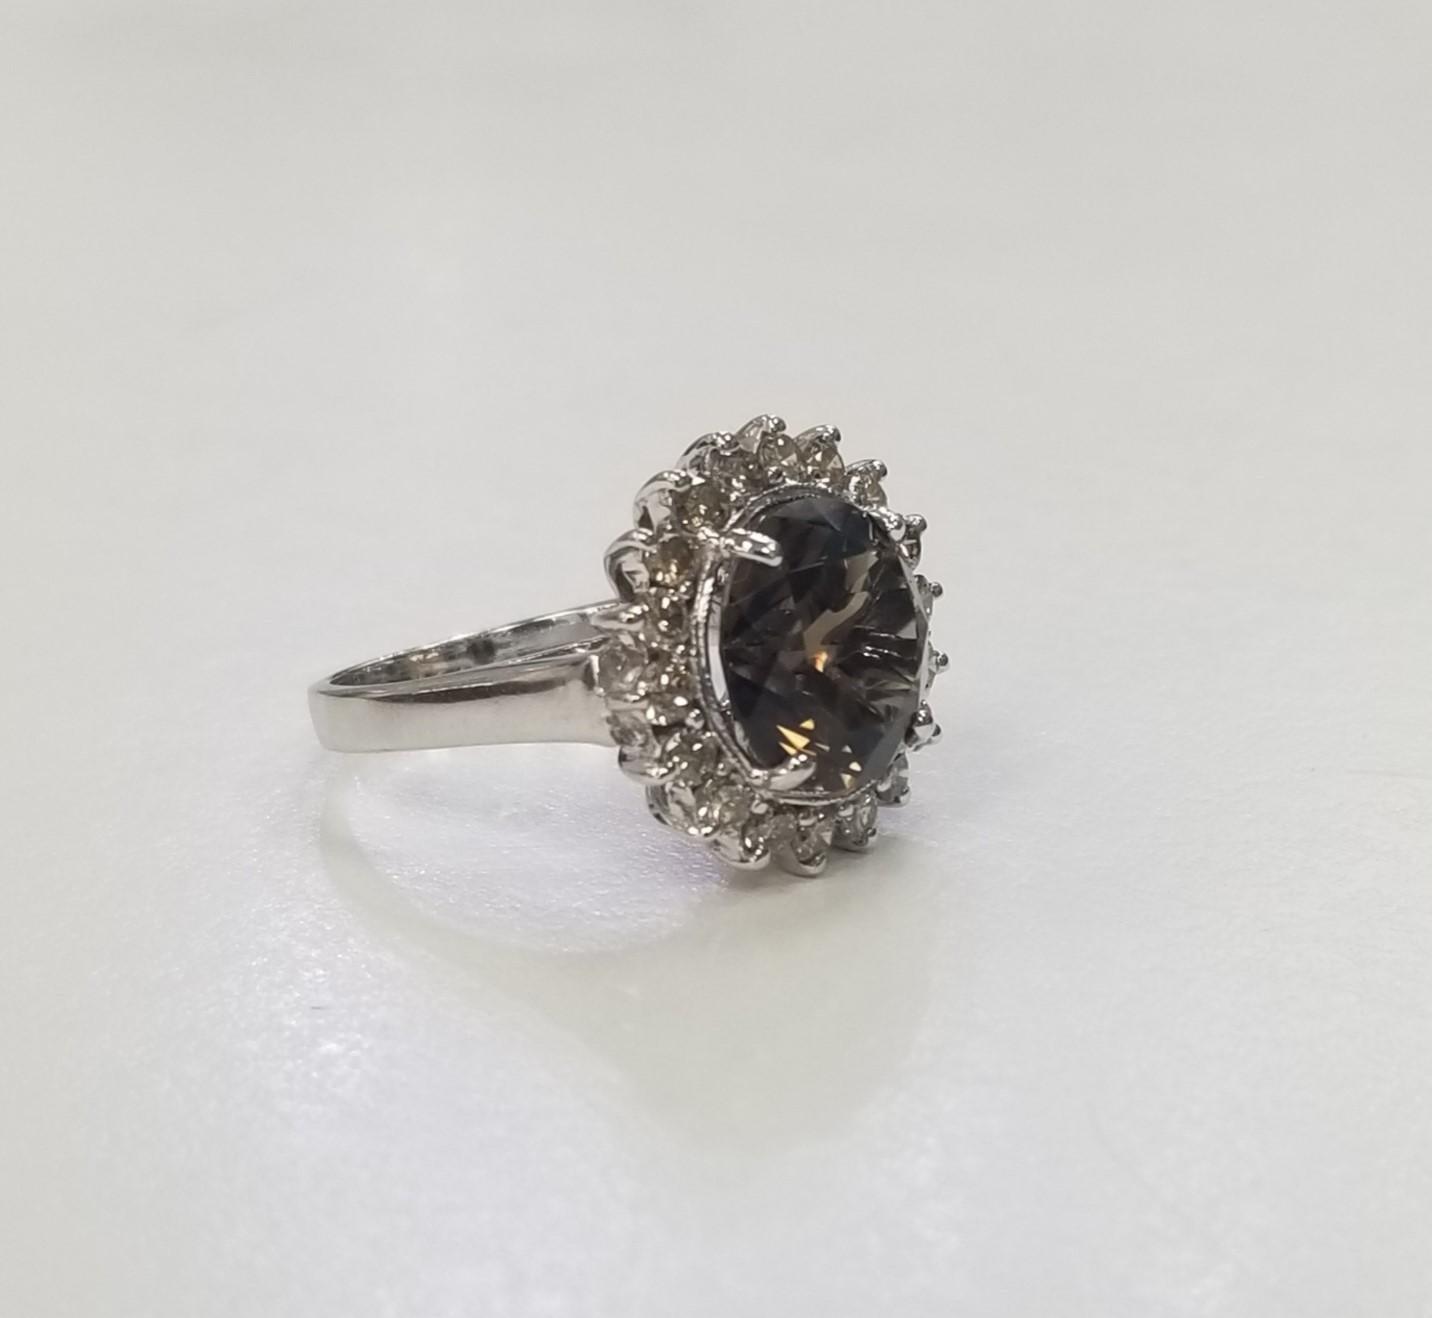 Specifications:
Vintage Look (Great condition)
Metal: 14K White Gold  
Weight: 6.7Gr
Main Stone: Smokey Quartz weighing 4.18cts.
Side Stones: 18 Round Diamonds 1.02cts.
Size: 6.5
The ring is a size 6.5 and can be sized to fit.  